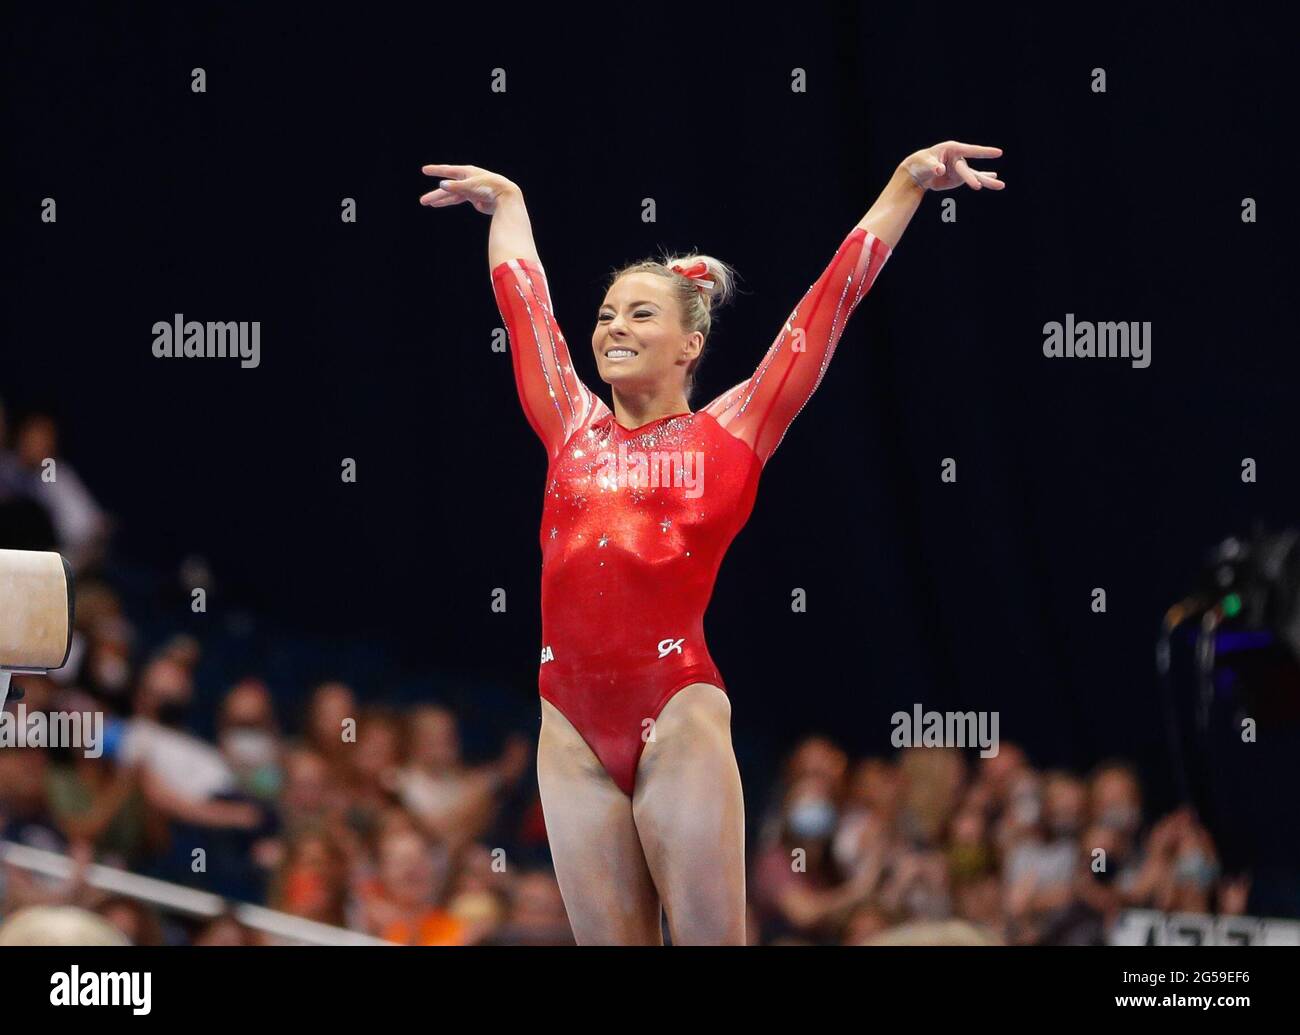 St Louis, USA. 25th June, 2021. June 25, 2021: MyKayla Skinner smiles as she completes her beam routine during Day 1 of the 2021 U.S. Women's Gymnastics Olympic Team Trials at the Dome at America's Center in St. Louis, MO. Kyle Okita/CSM Credit: Cal Sport Media/Alamy Live News Stock Photo